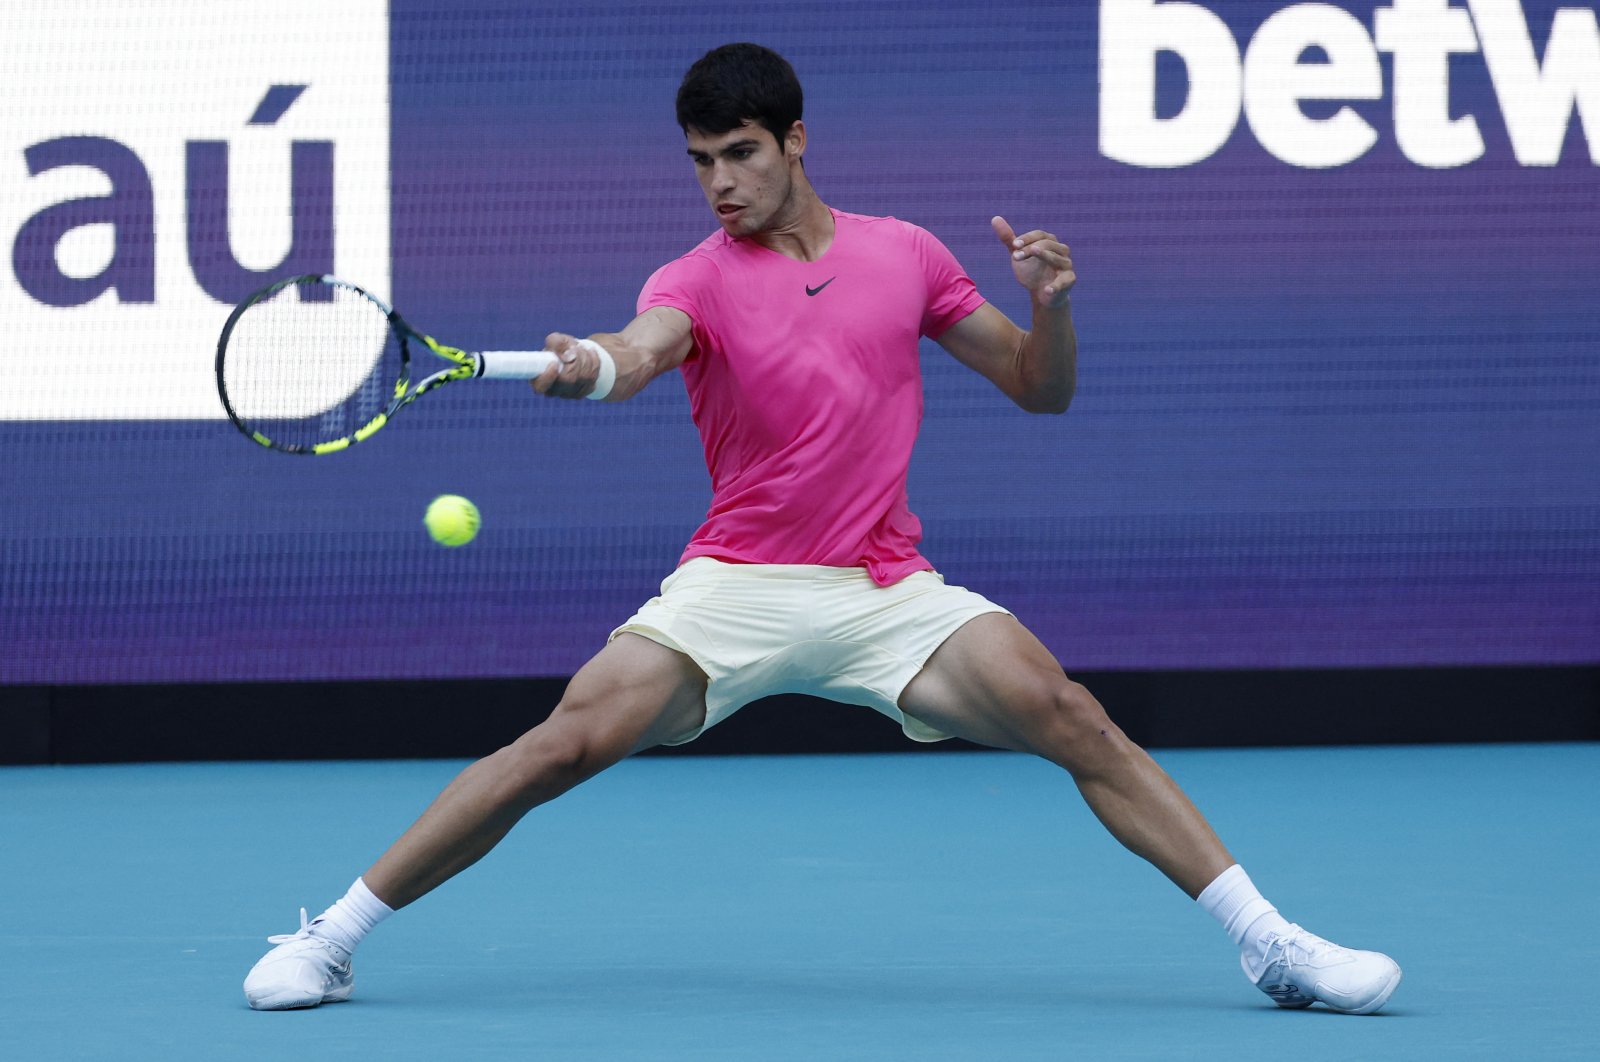 Spain&#039;s Carlos Alcaraz hits a forehand against USA&#039;s Tommy Paul on day 9 of the Miami Open at Hard Rock Stadium, Miami, US, March 28, 2022. (Reuters Photo)